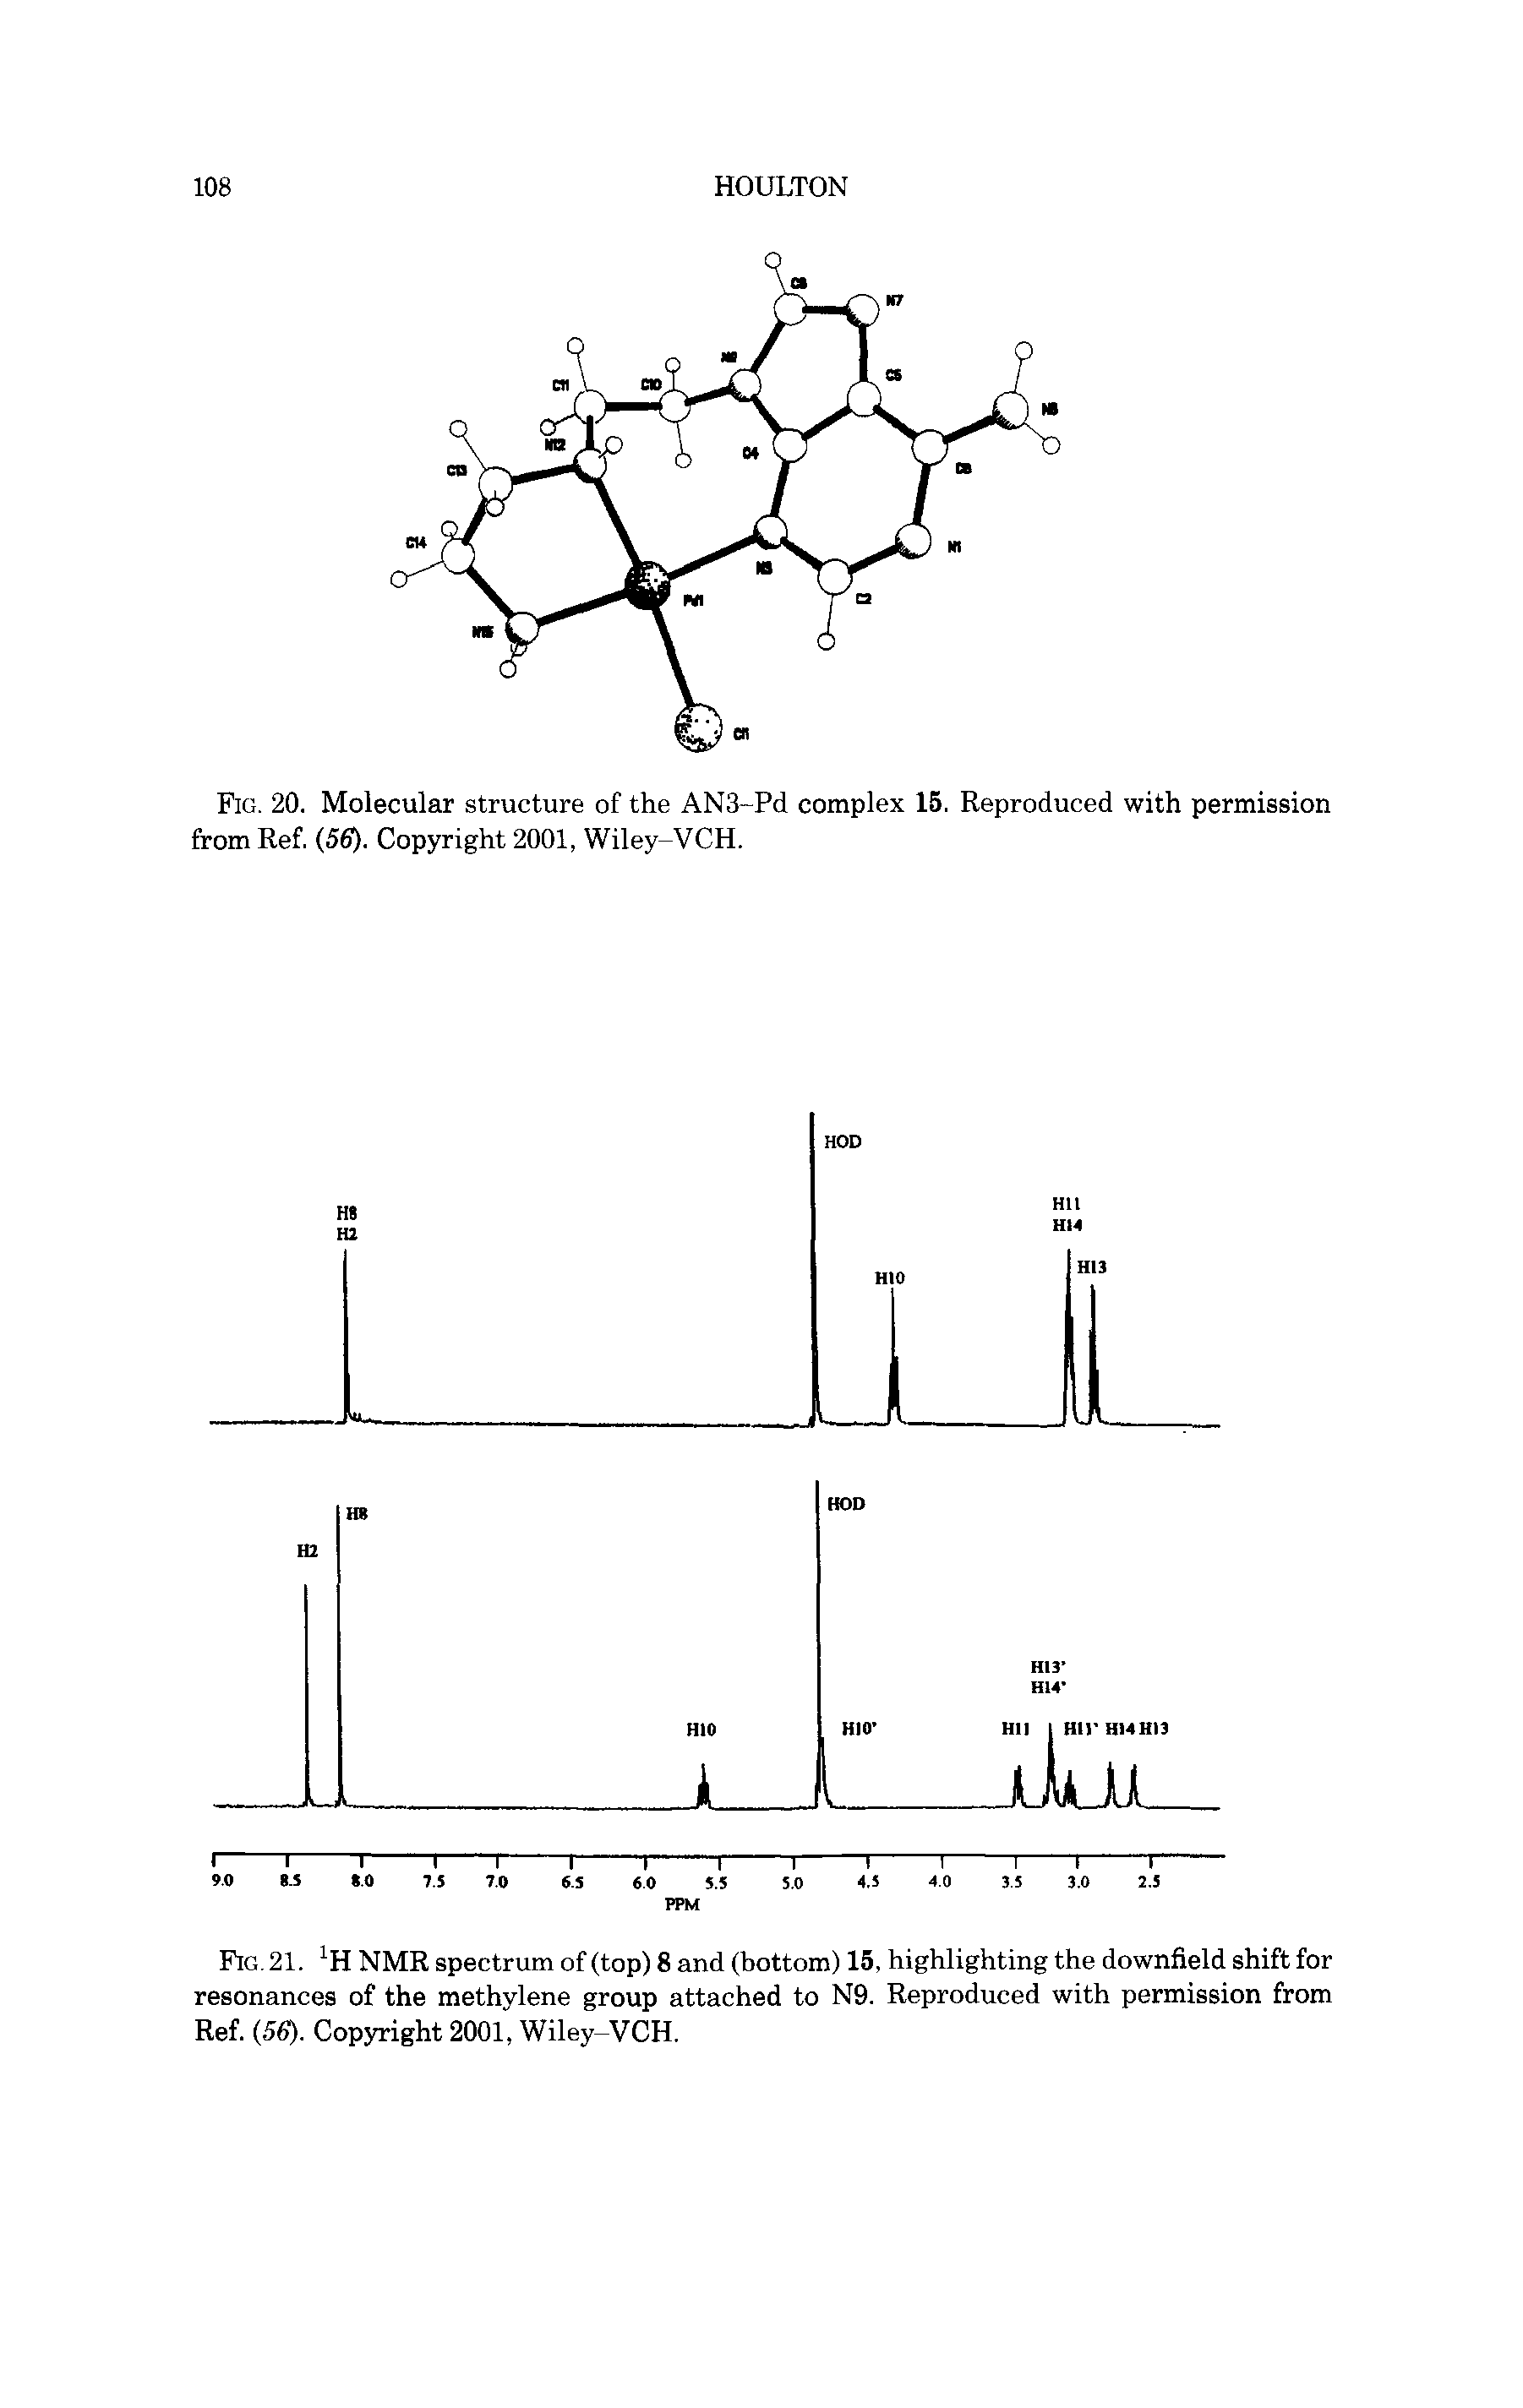 Fig. 21. XH NMR spectrum of (top) 8 and (bottom) 15, highlighting the downfield shift for resonances of the methylene group attached to N9. Reproduced with permission from Ref. (56). Copyright 2001, Wiley-VCH.